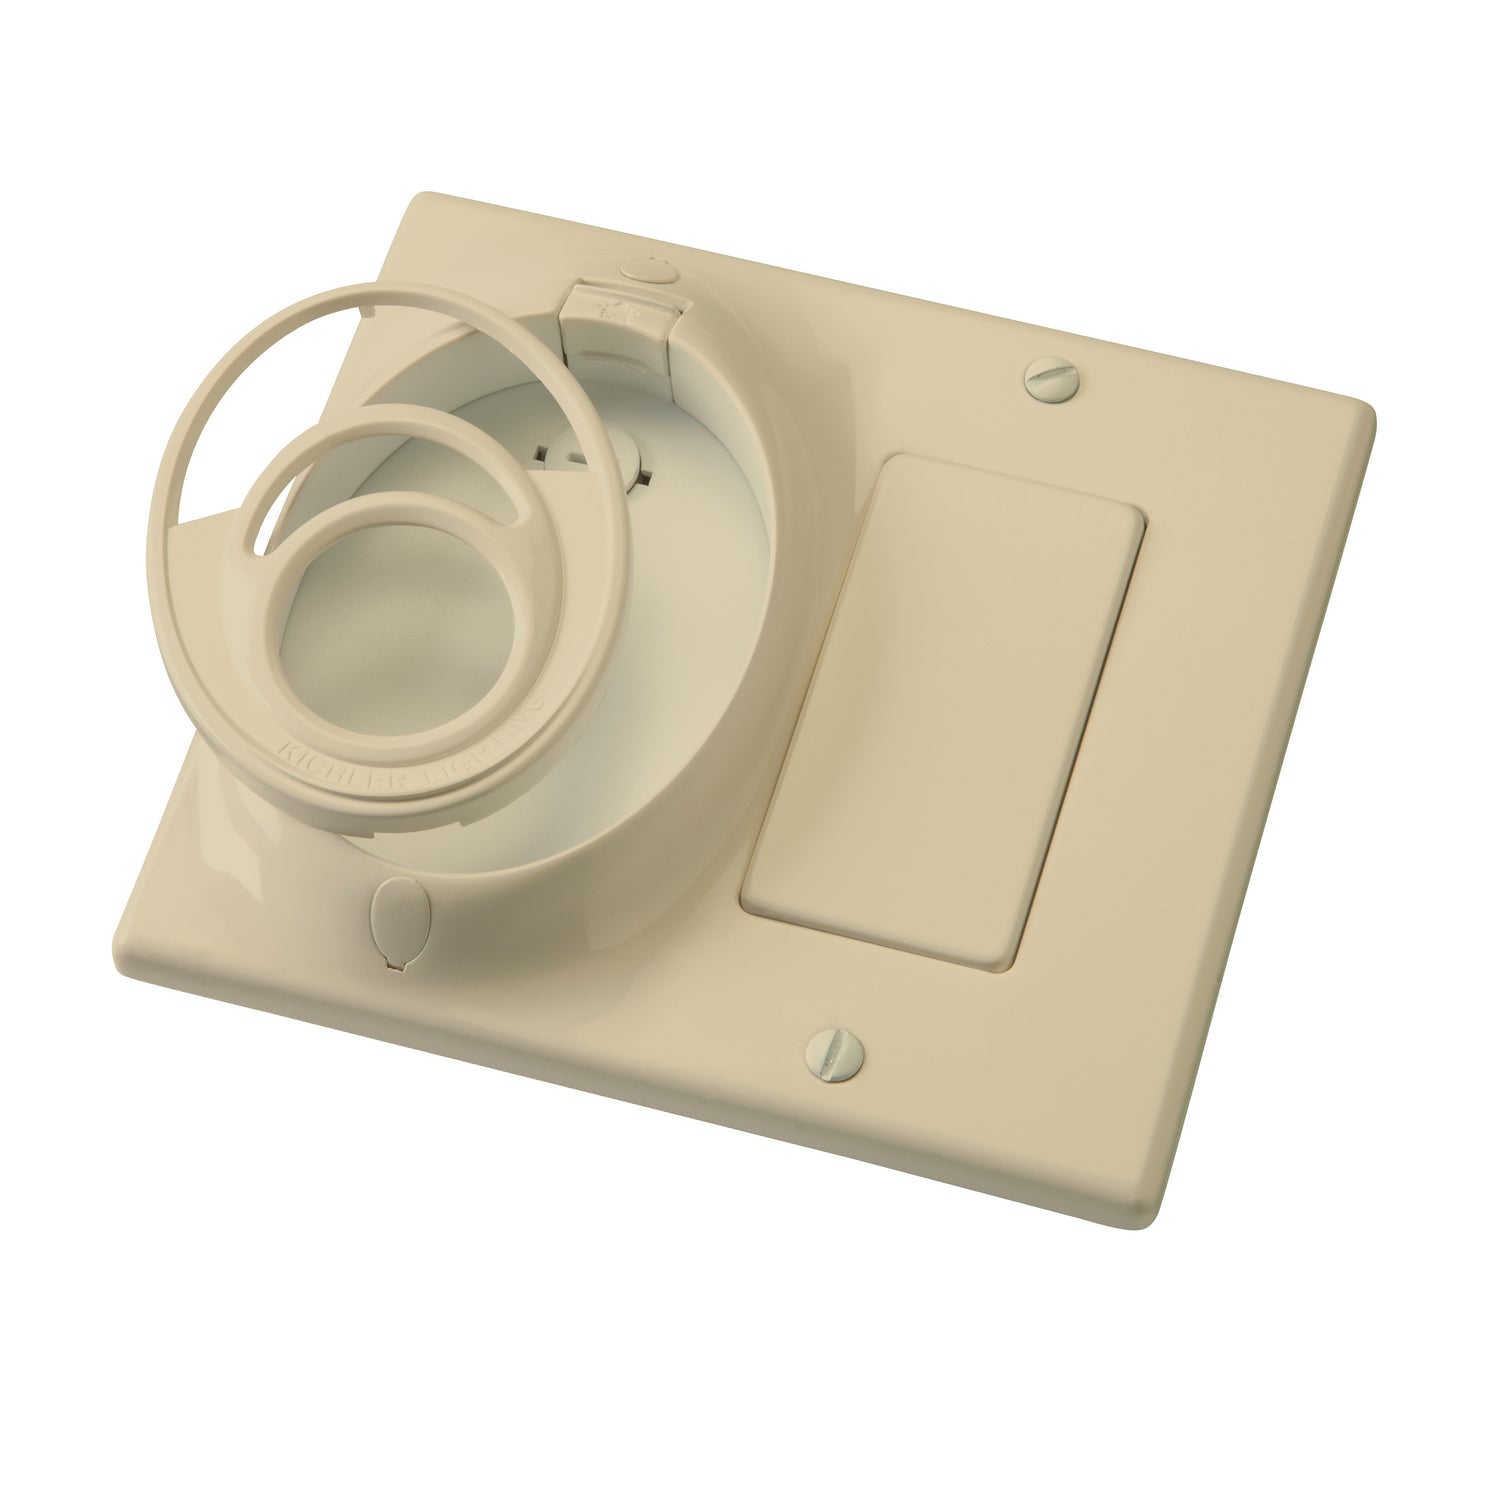 Kichler Canada - Dual Gang CoolTouch Wall Plate - Accessory - Ivory (Not Painted)- Union Lighting Luminaires Decor